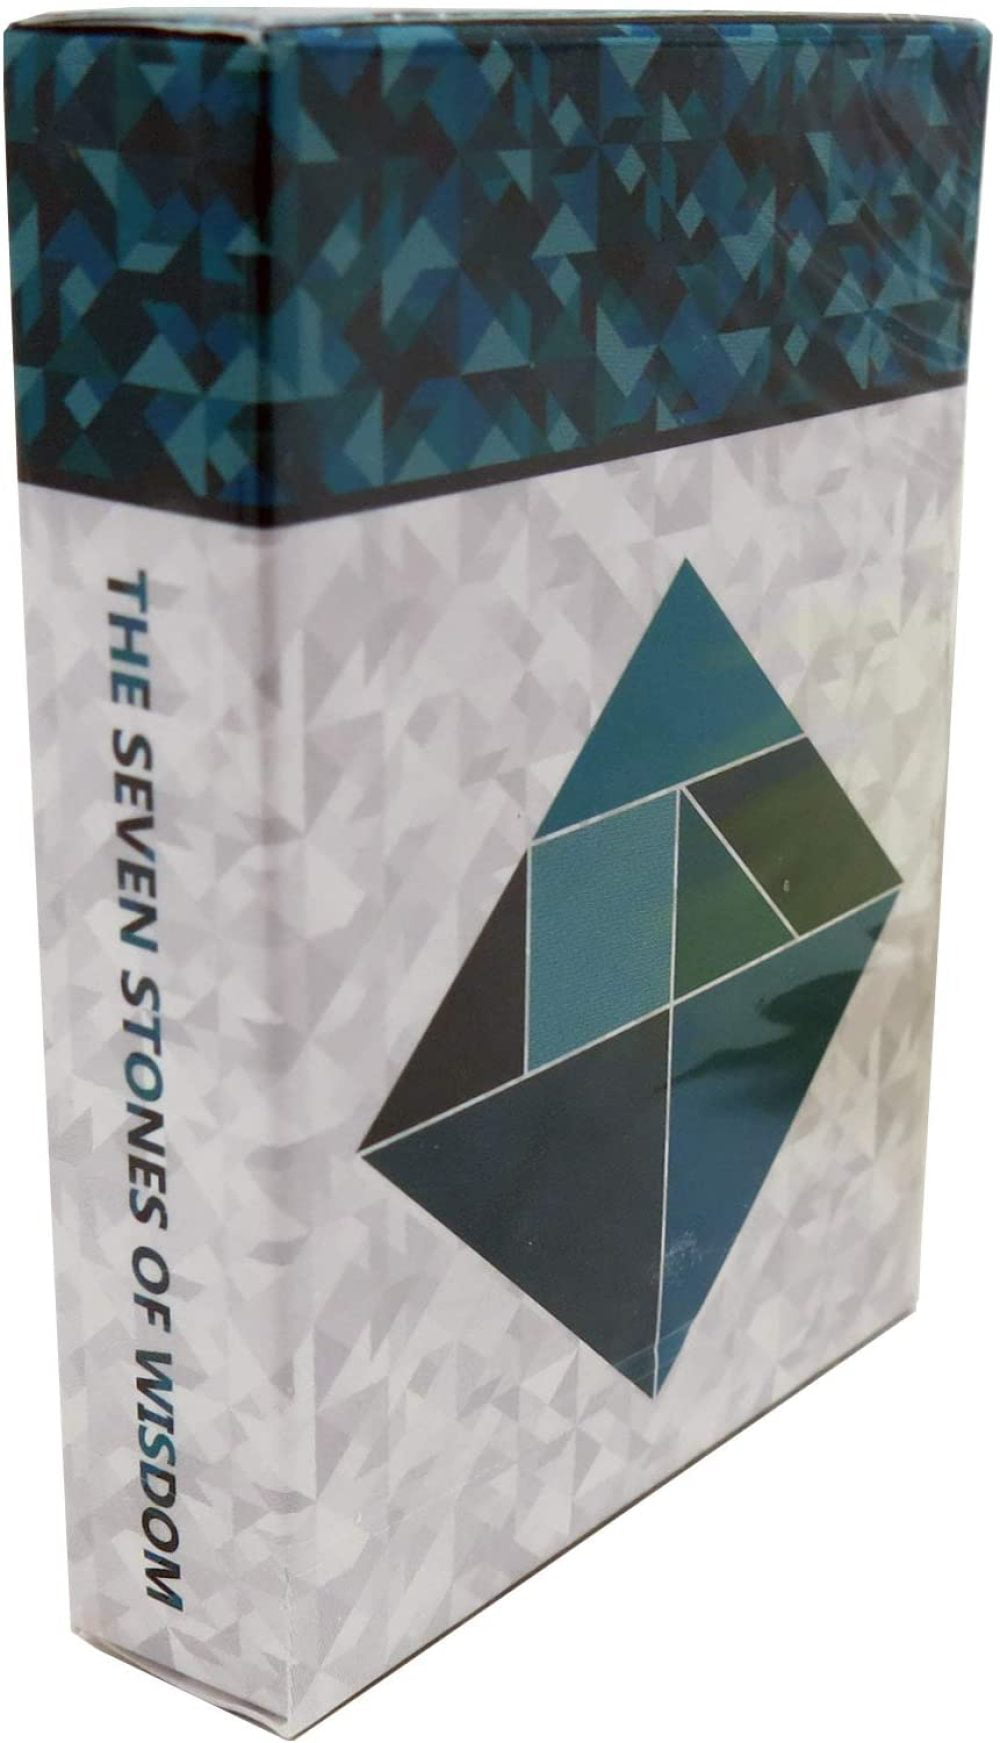 Details about   Tangram Playing Cards Limited Edition Poker Deck by Murphy's Magic Supplies 